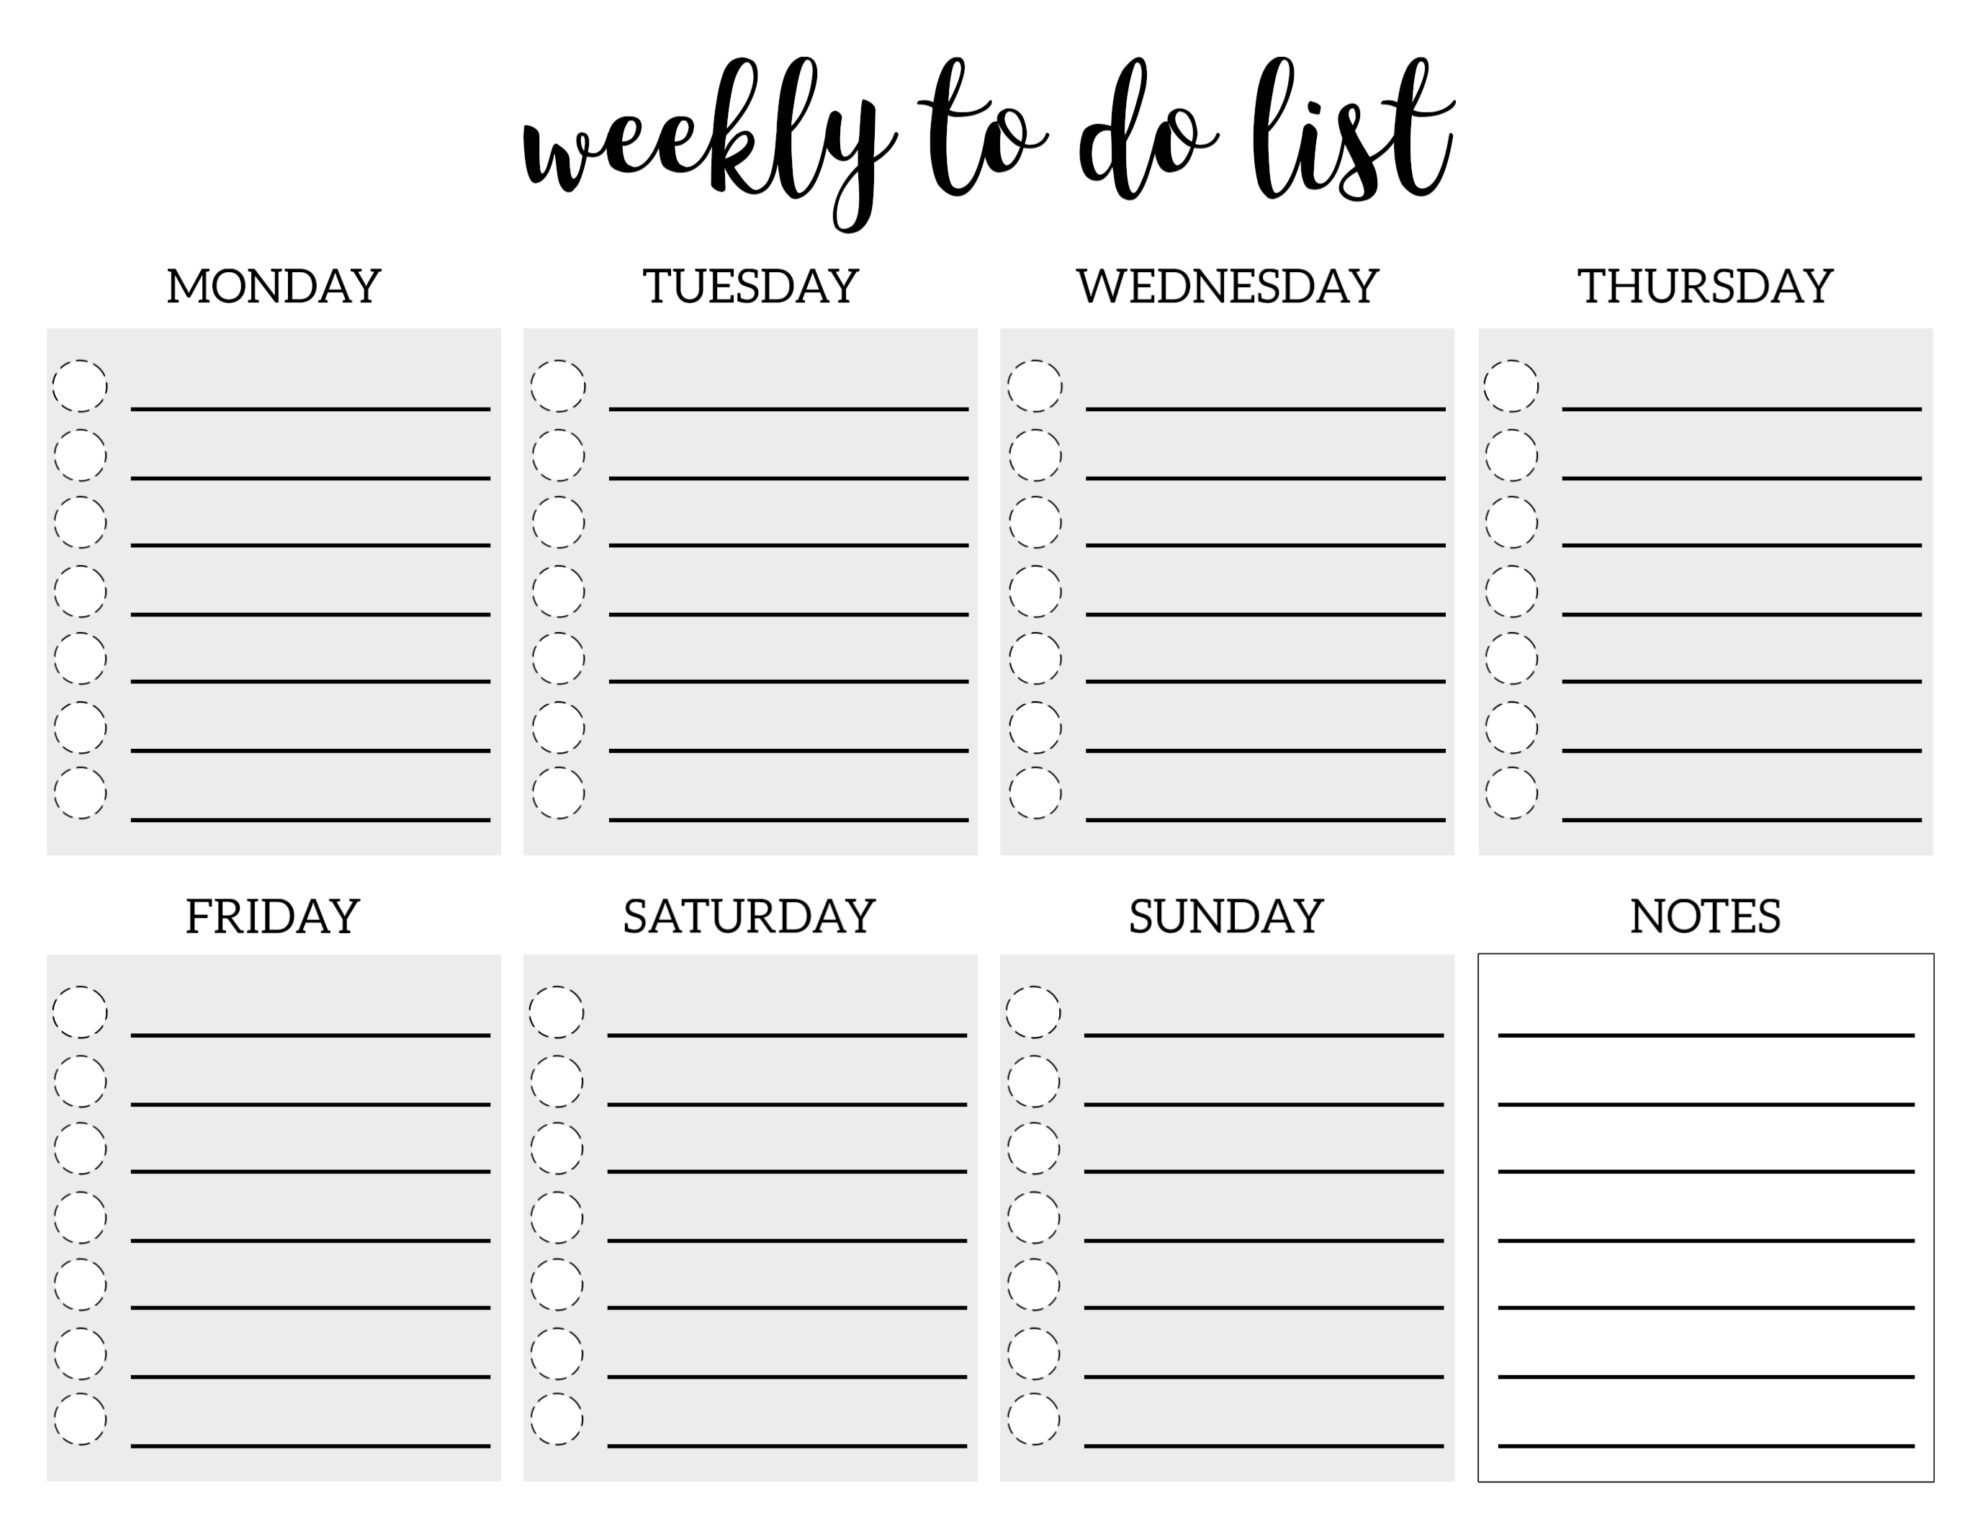 Weekly To Do List Printable Checklist Template  Paper Trail Design Pertaining To Checklist With Boxes Template Intended For Checklist With Boxes Template